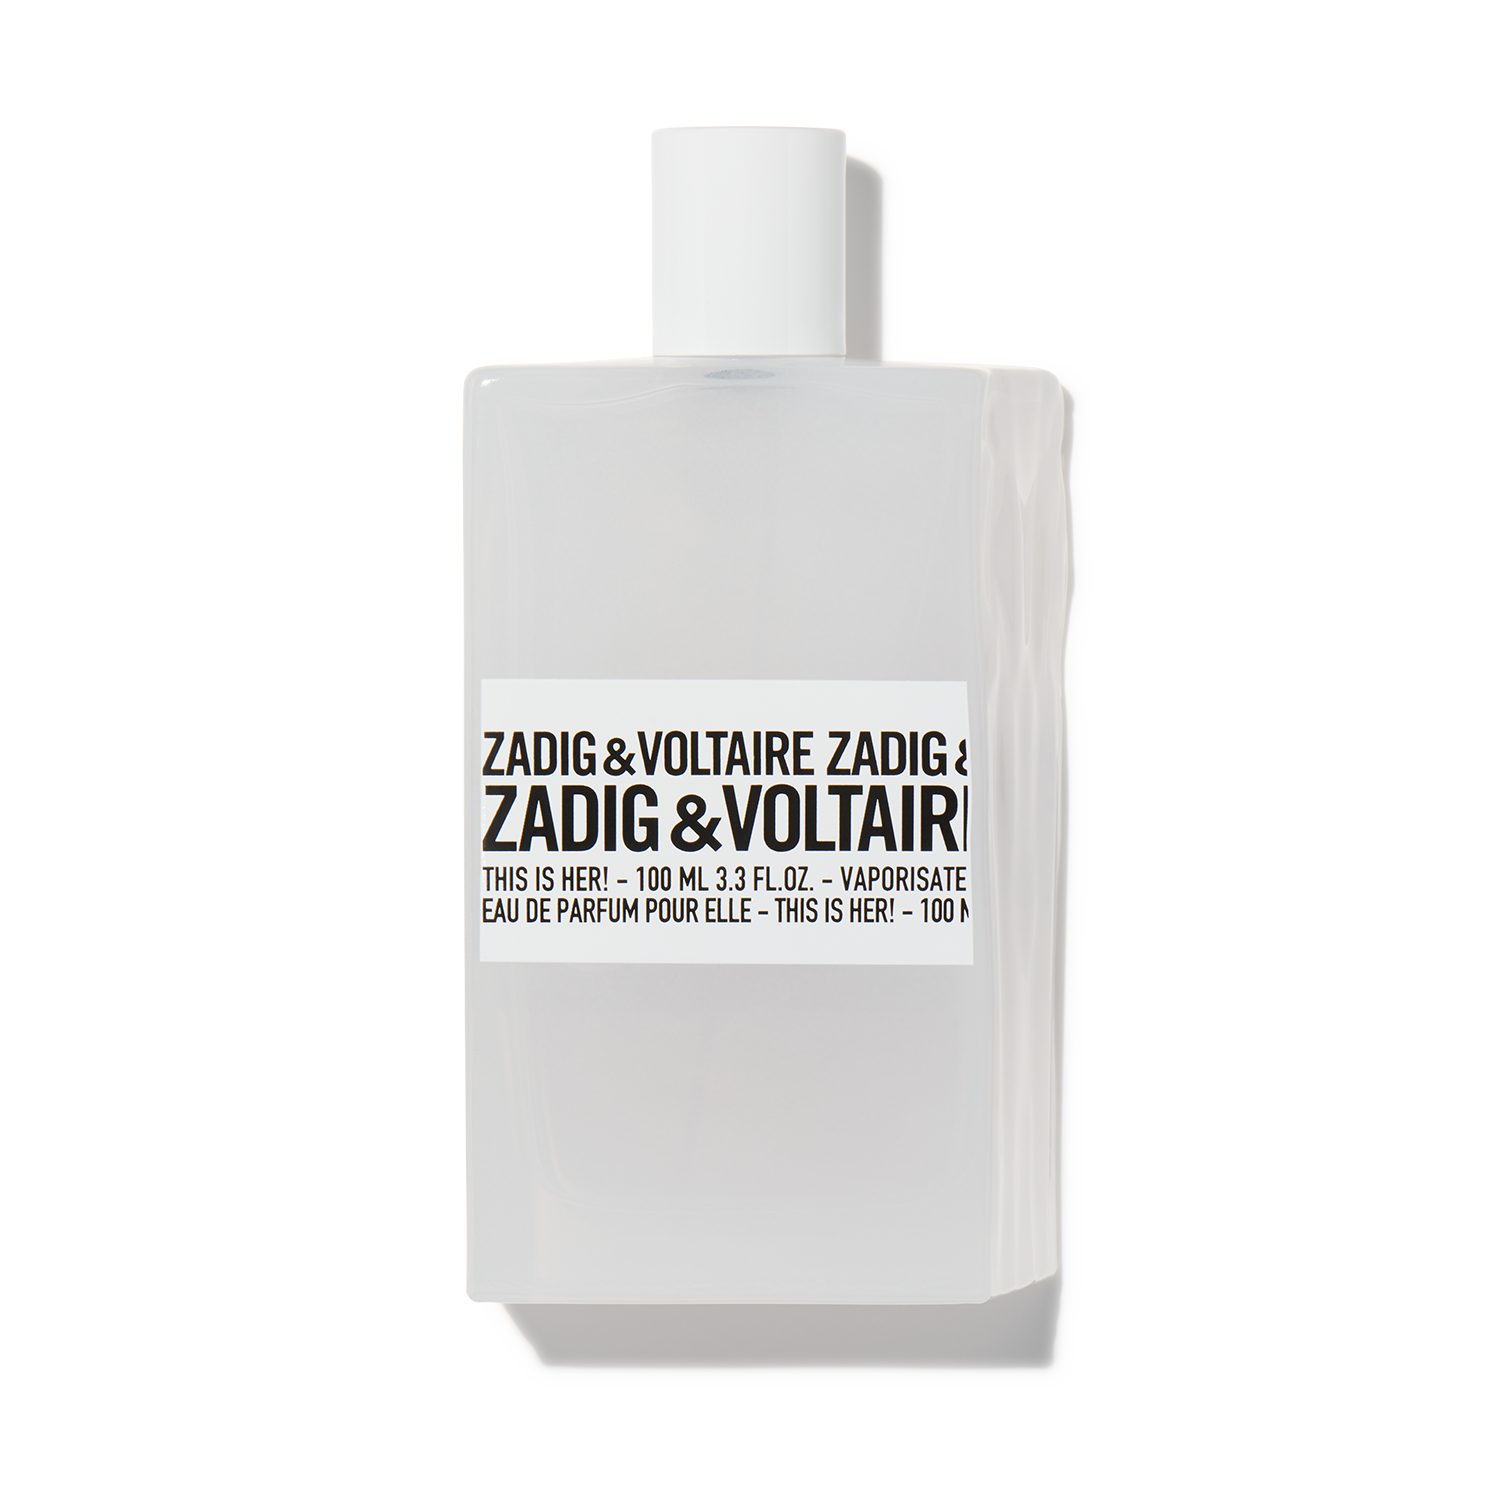 Zadig & Voltaire Zadig and Voltaire Ladies This is Her! EDP Spray 3.4 oz  (100 ml) 3423474891856 - Fragrances & Beauty, This Is Her! - Jomashop